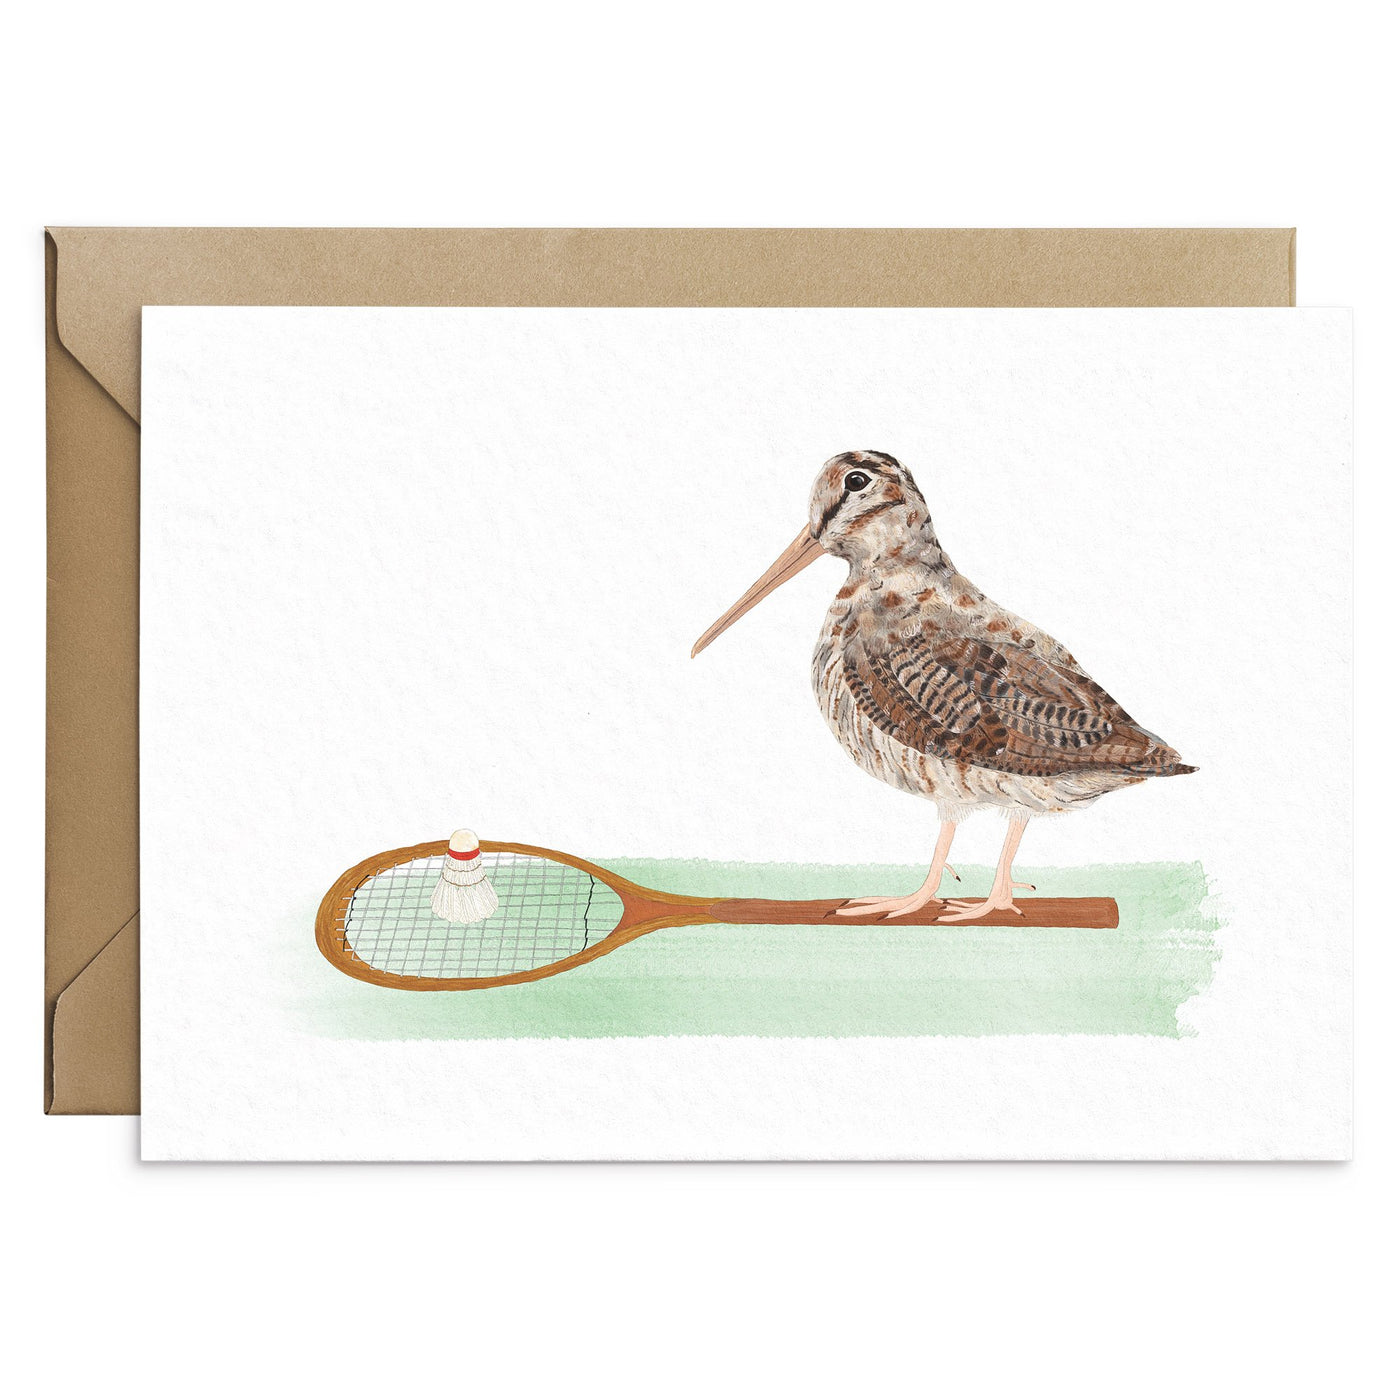 Woodcock Playing Badminton Card - Poppins & Co.